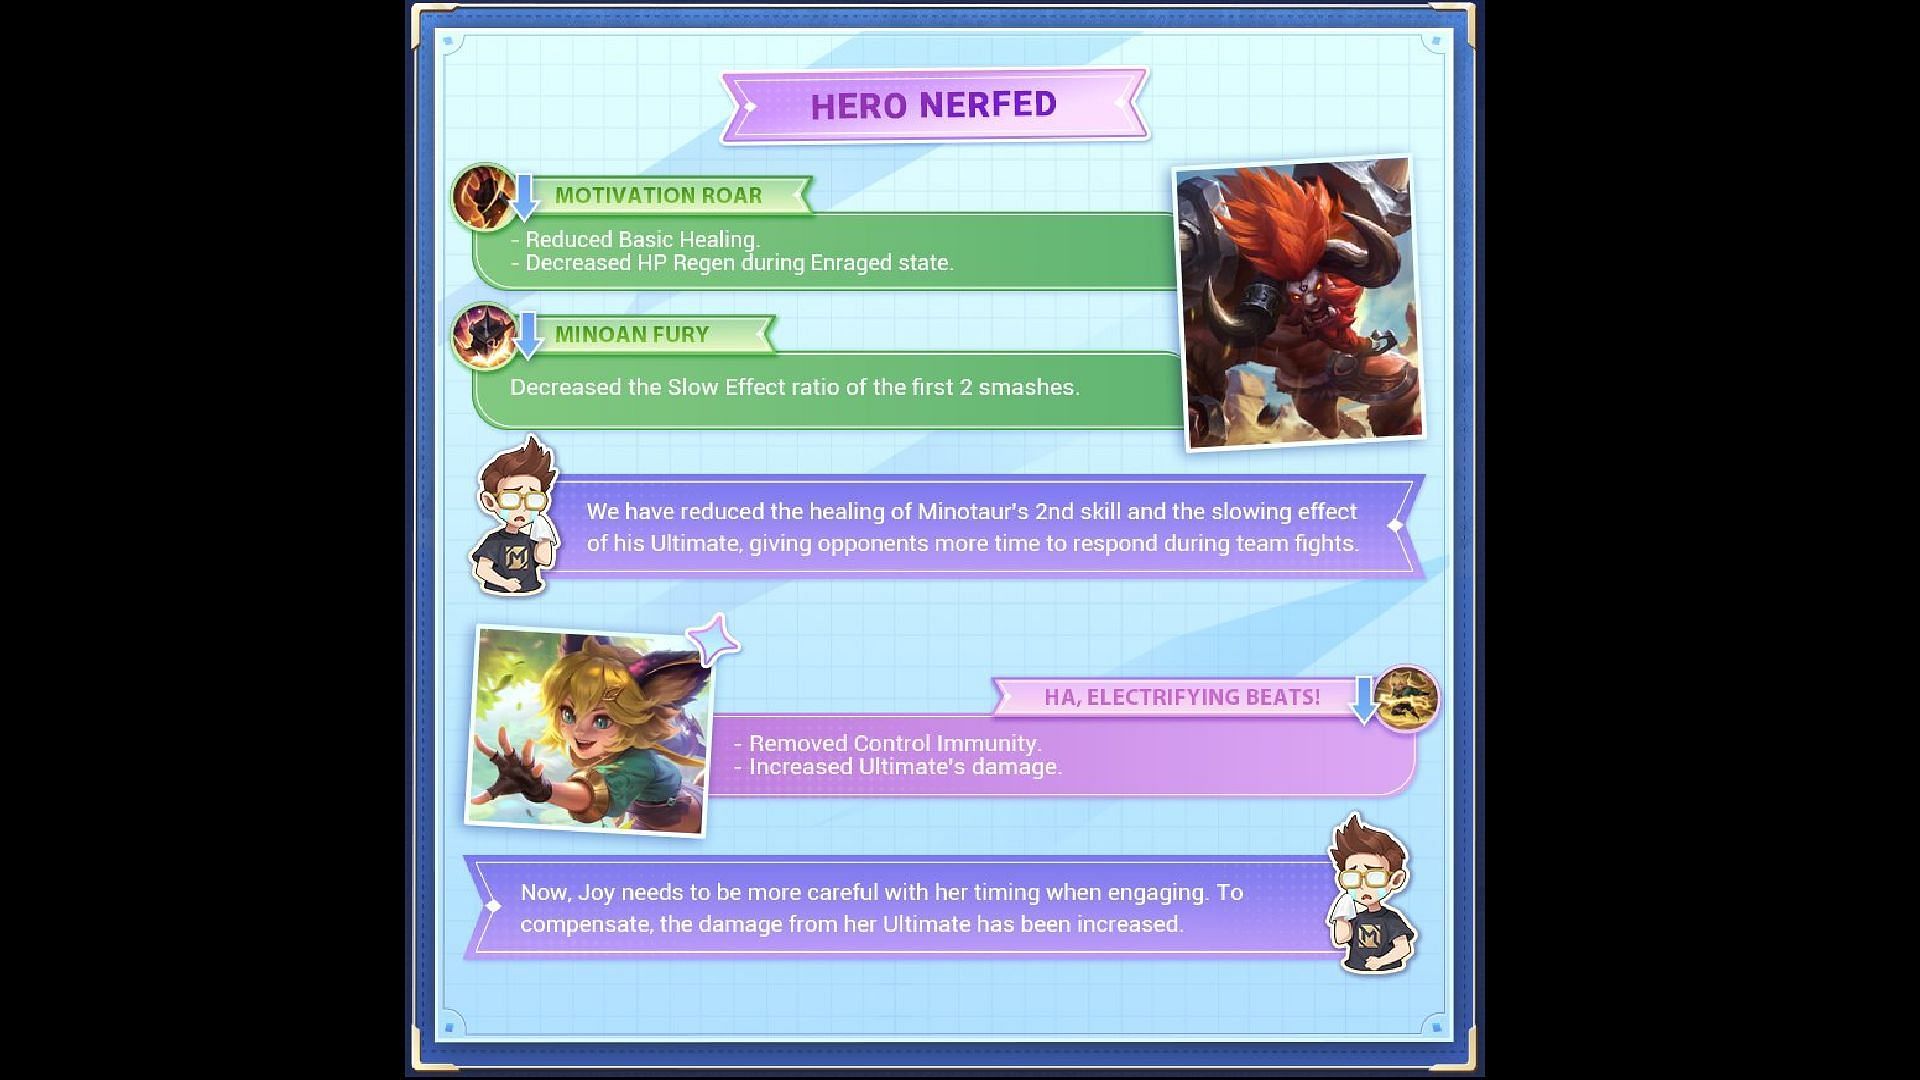 Minotaur and Joy will be nerfed in this update (Image via Moonton games)